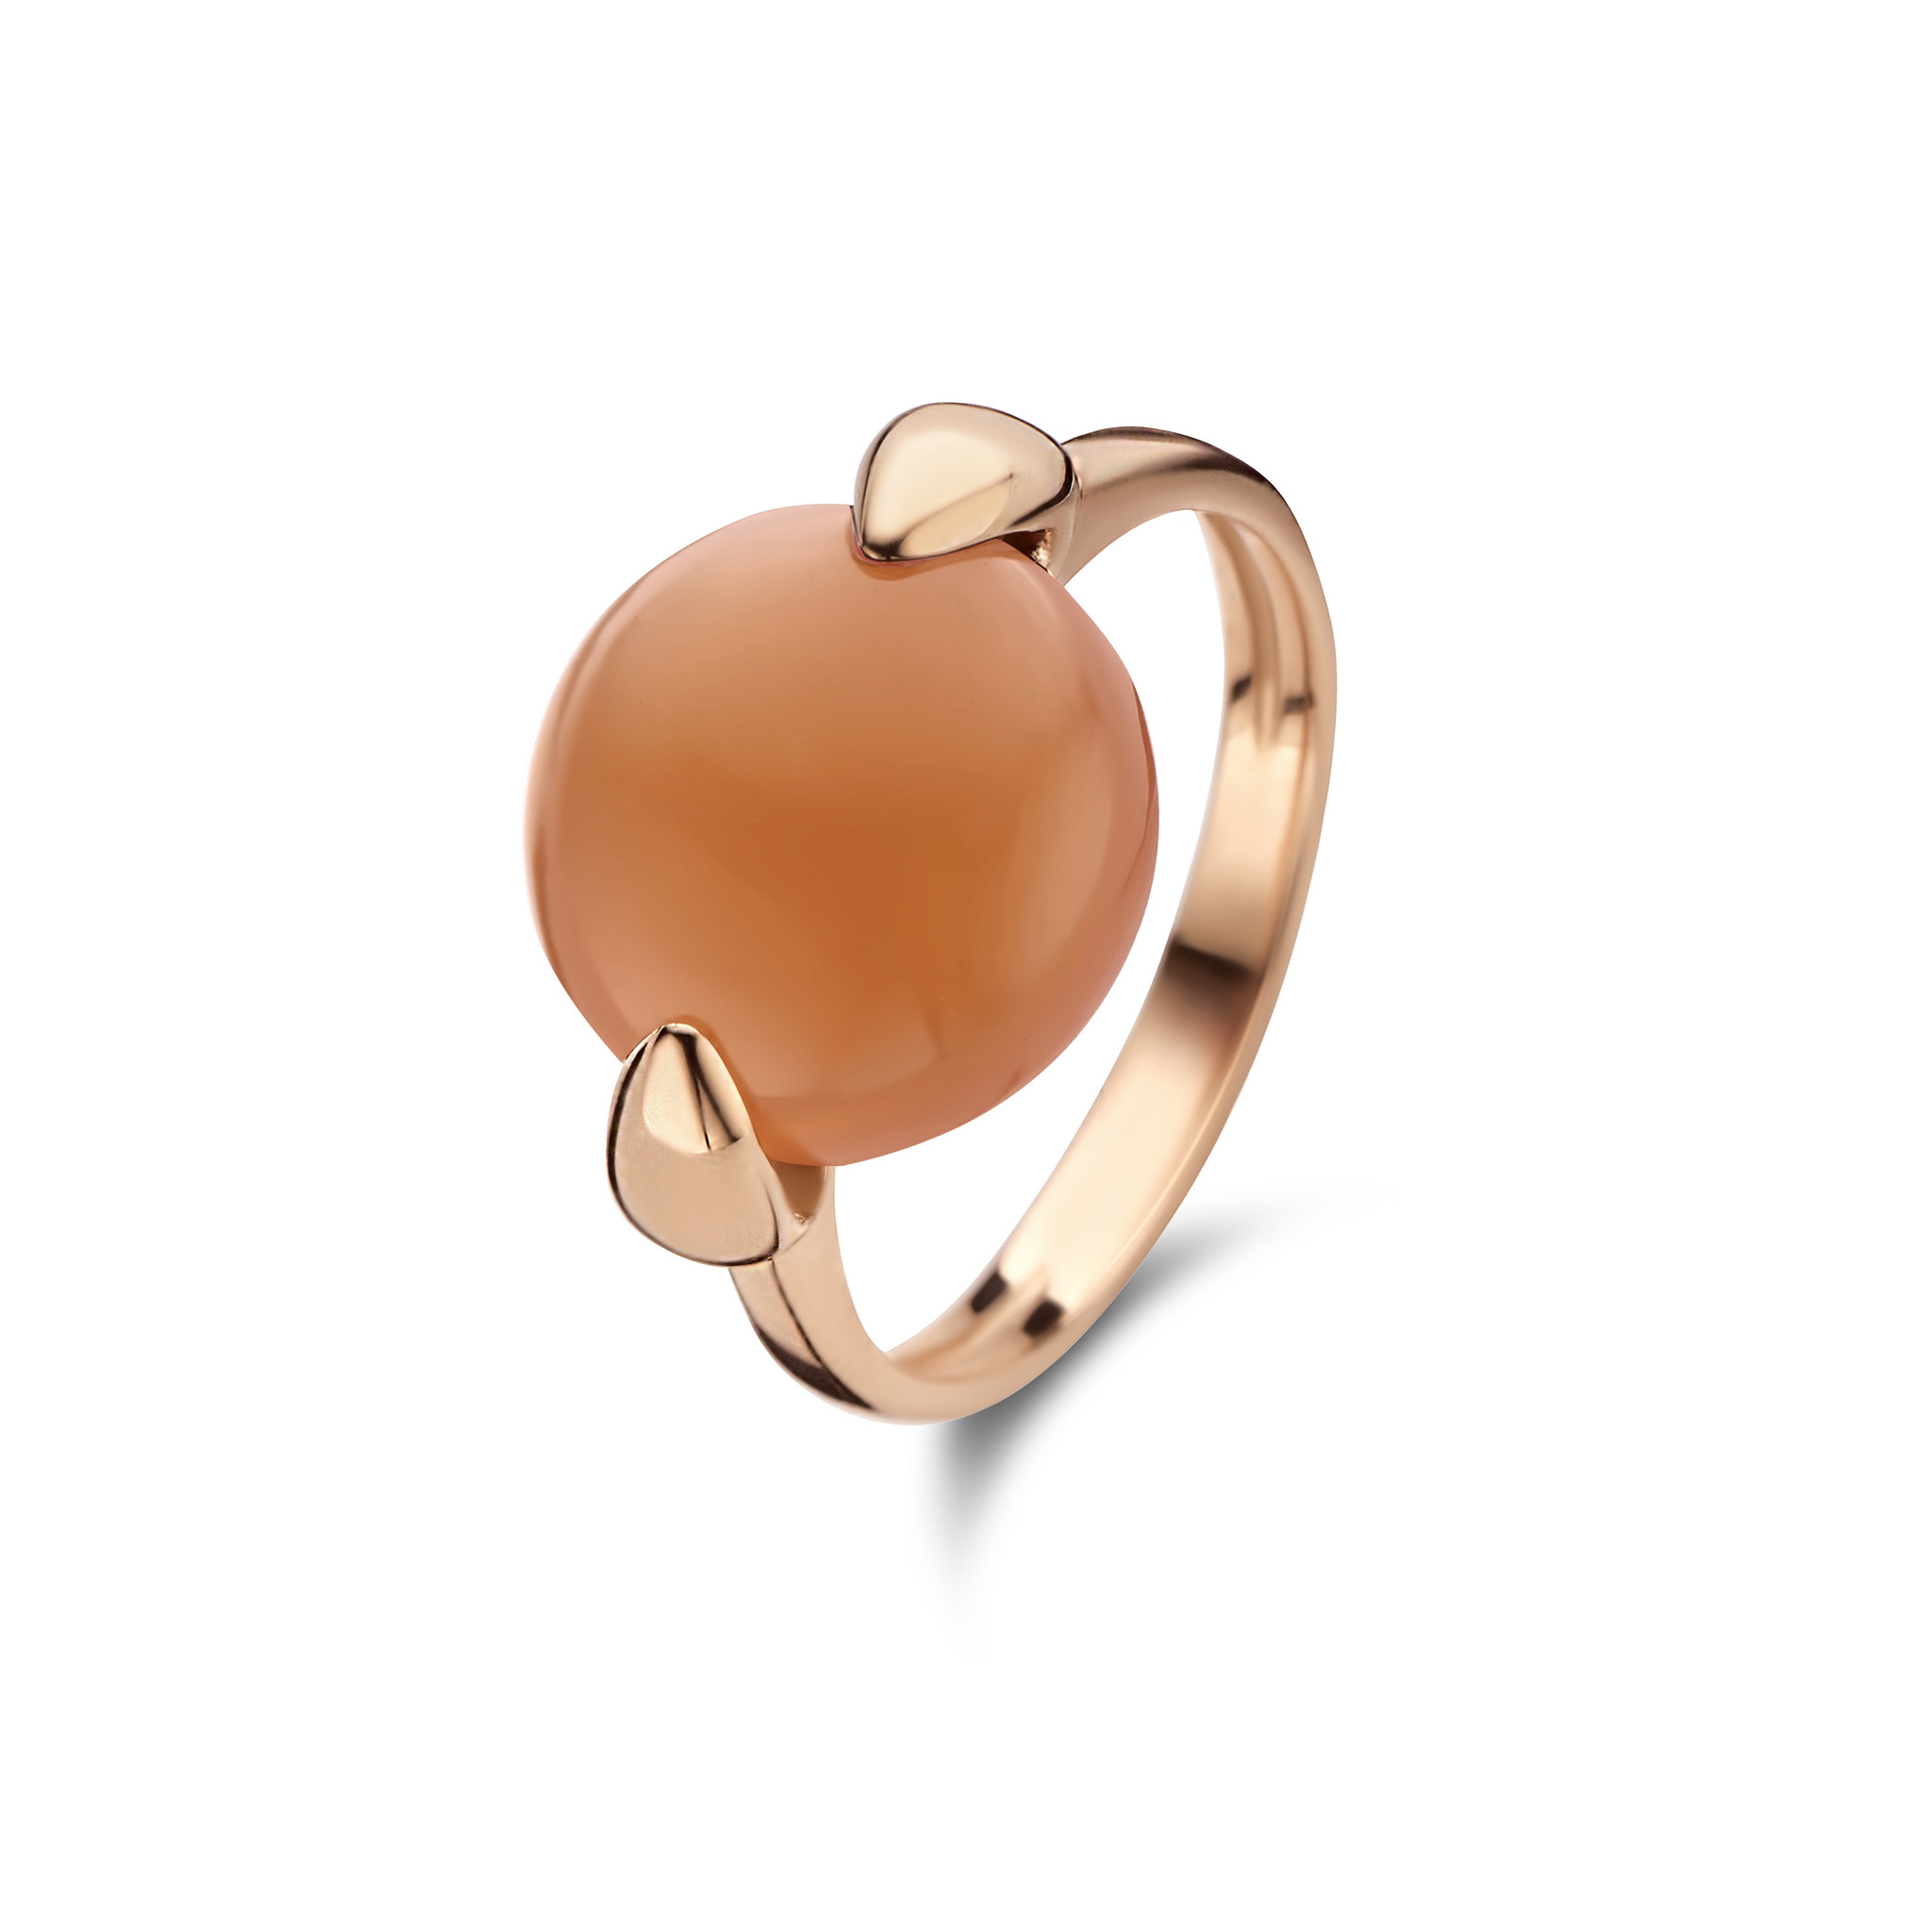 Palermo Pearl Ring